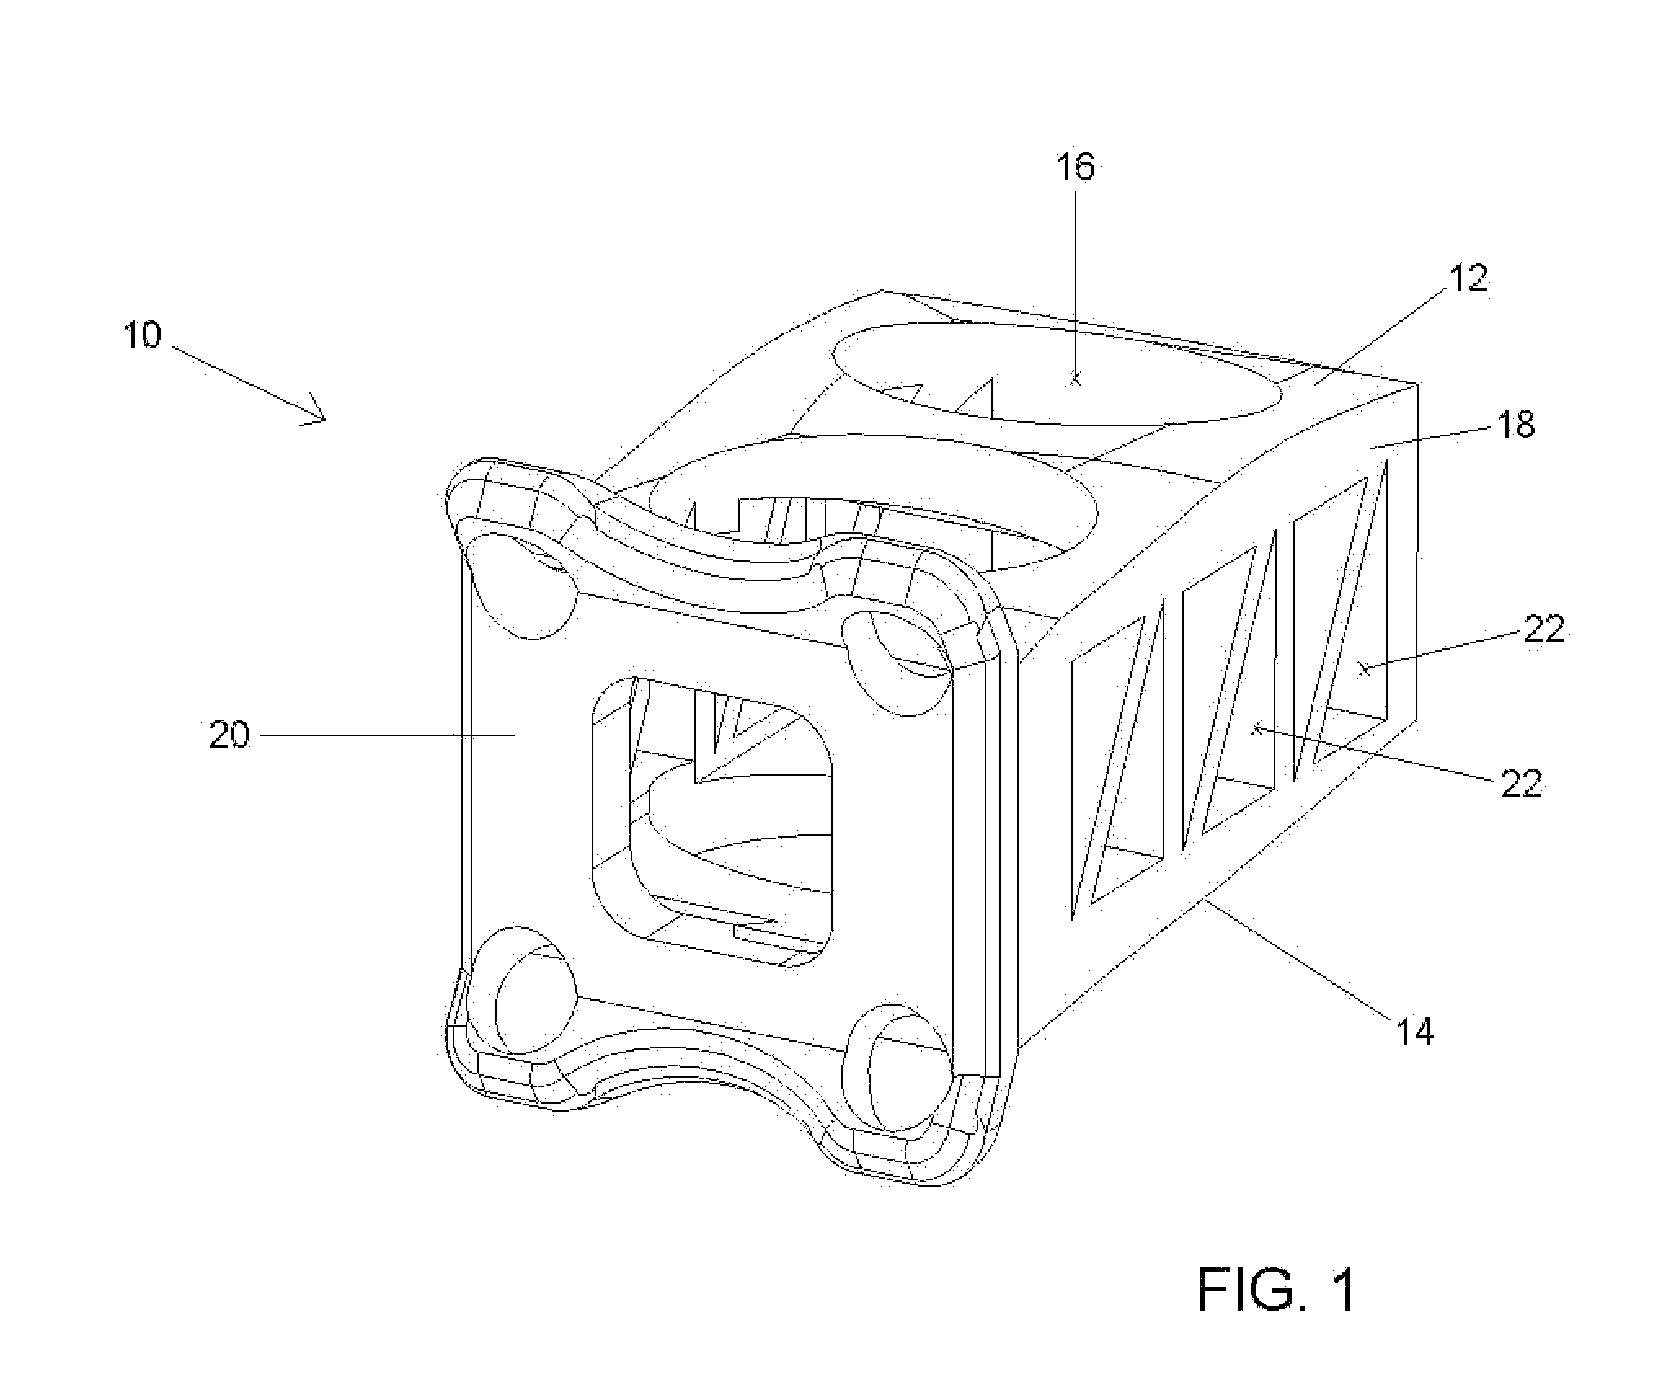 Anterior Spinal Fusion and Fixation Cage with Integrated Plate and Method of Use